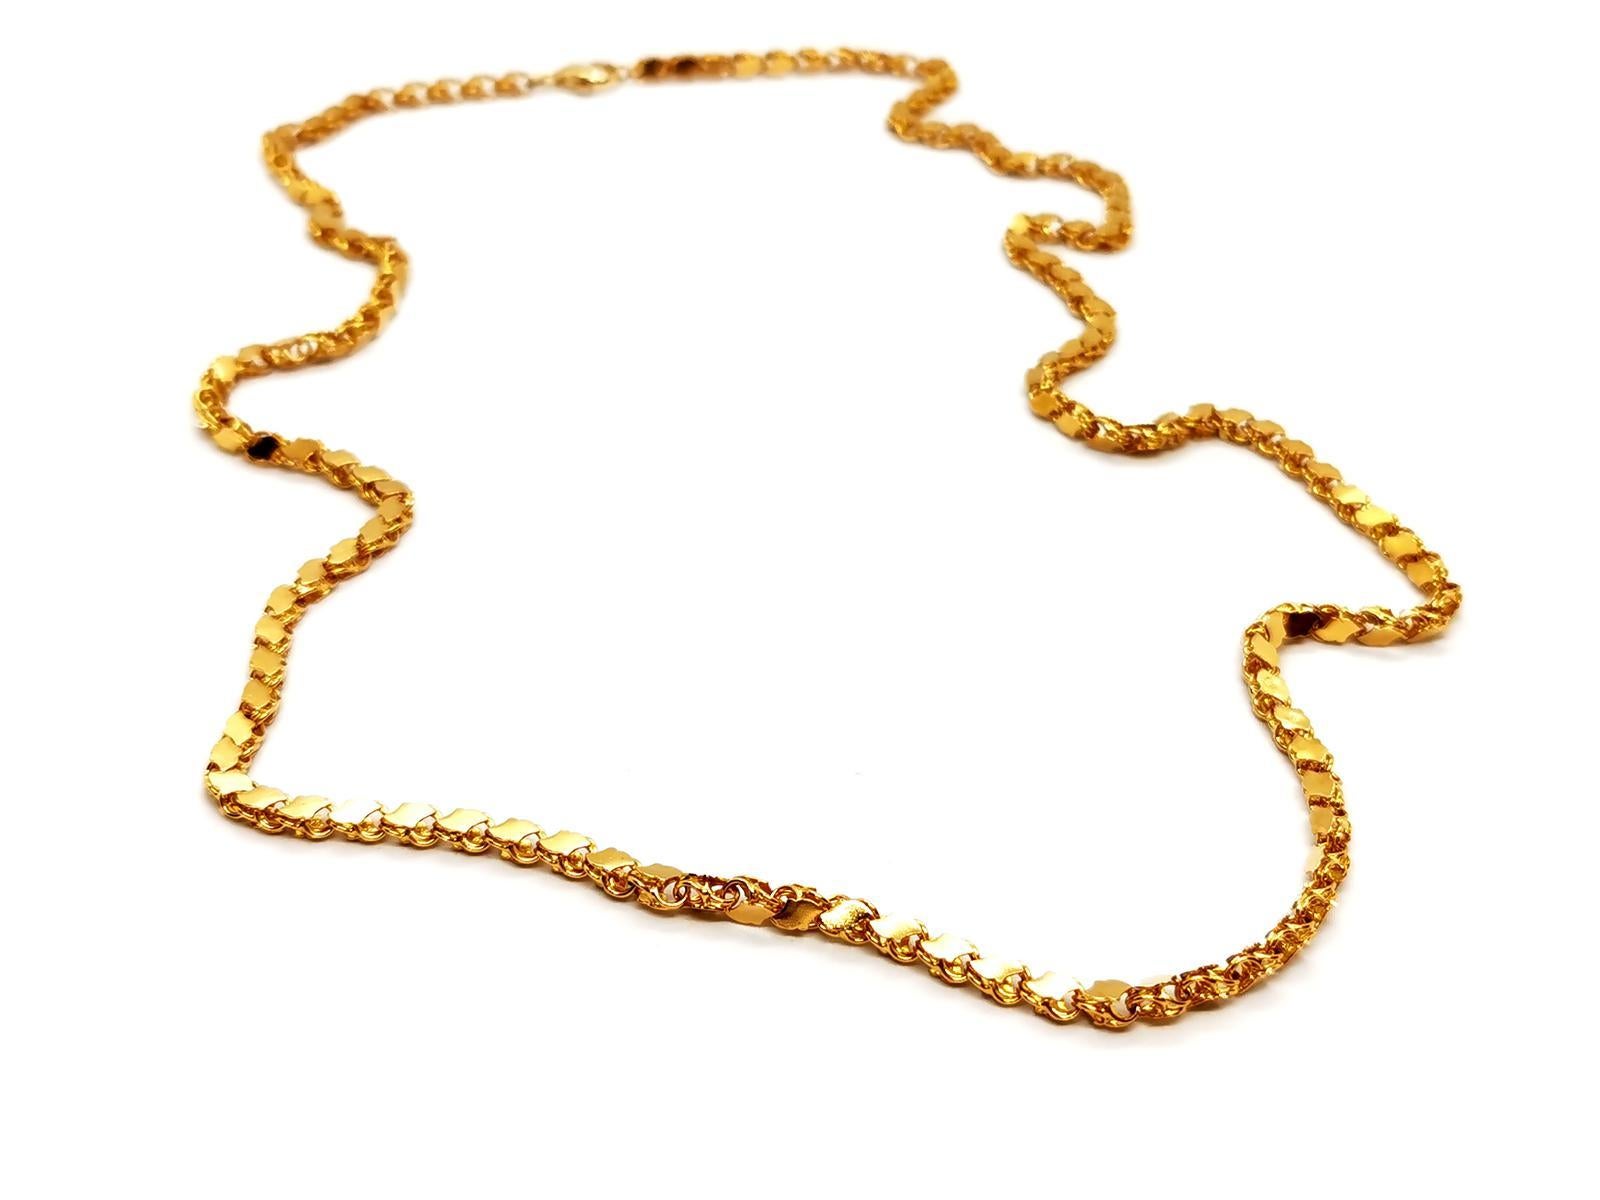 Necklace in yellow gold 875 thousandths (21 carats). length: 73cm. width: 0.42cm. total weight: 40.66g. carabiner clasp. Owl hallmark. excellent condition.
